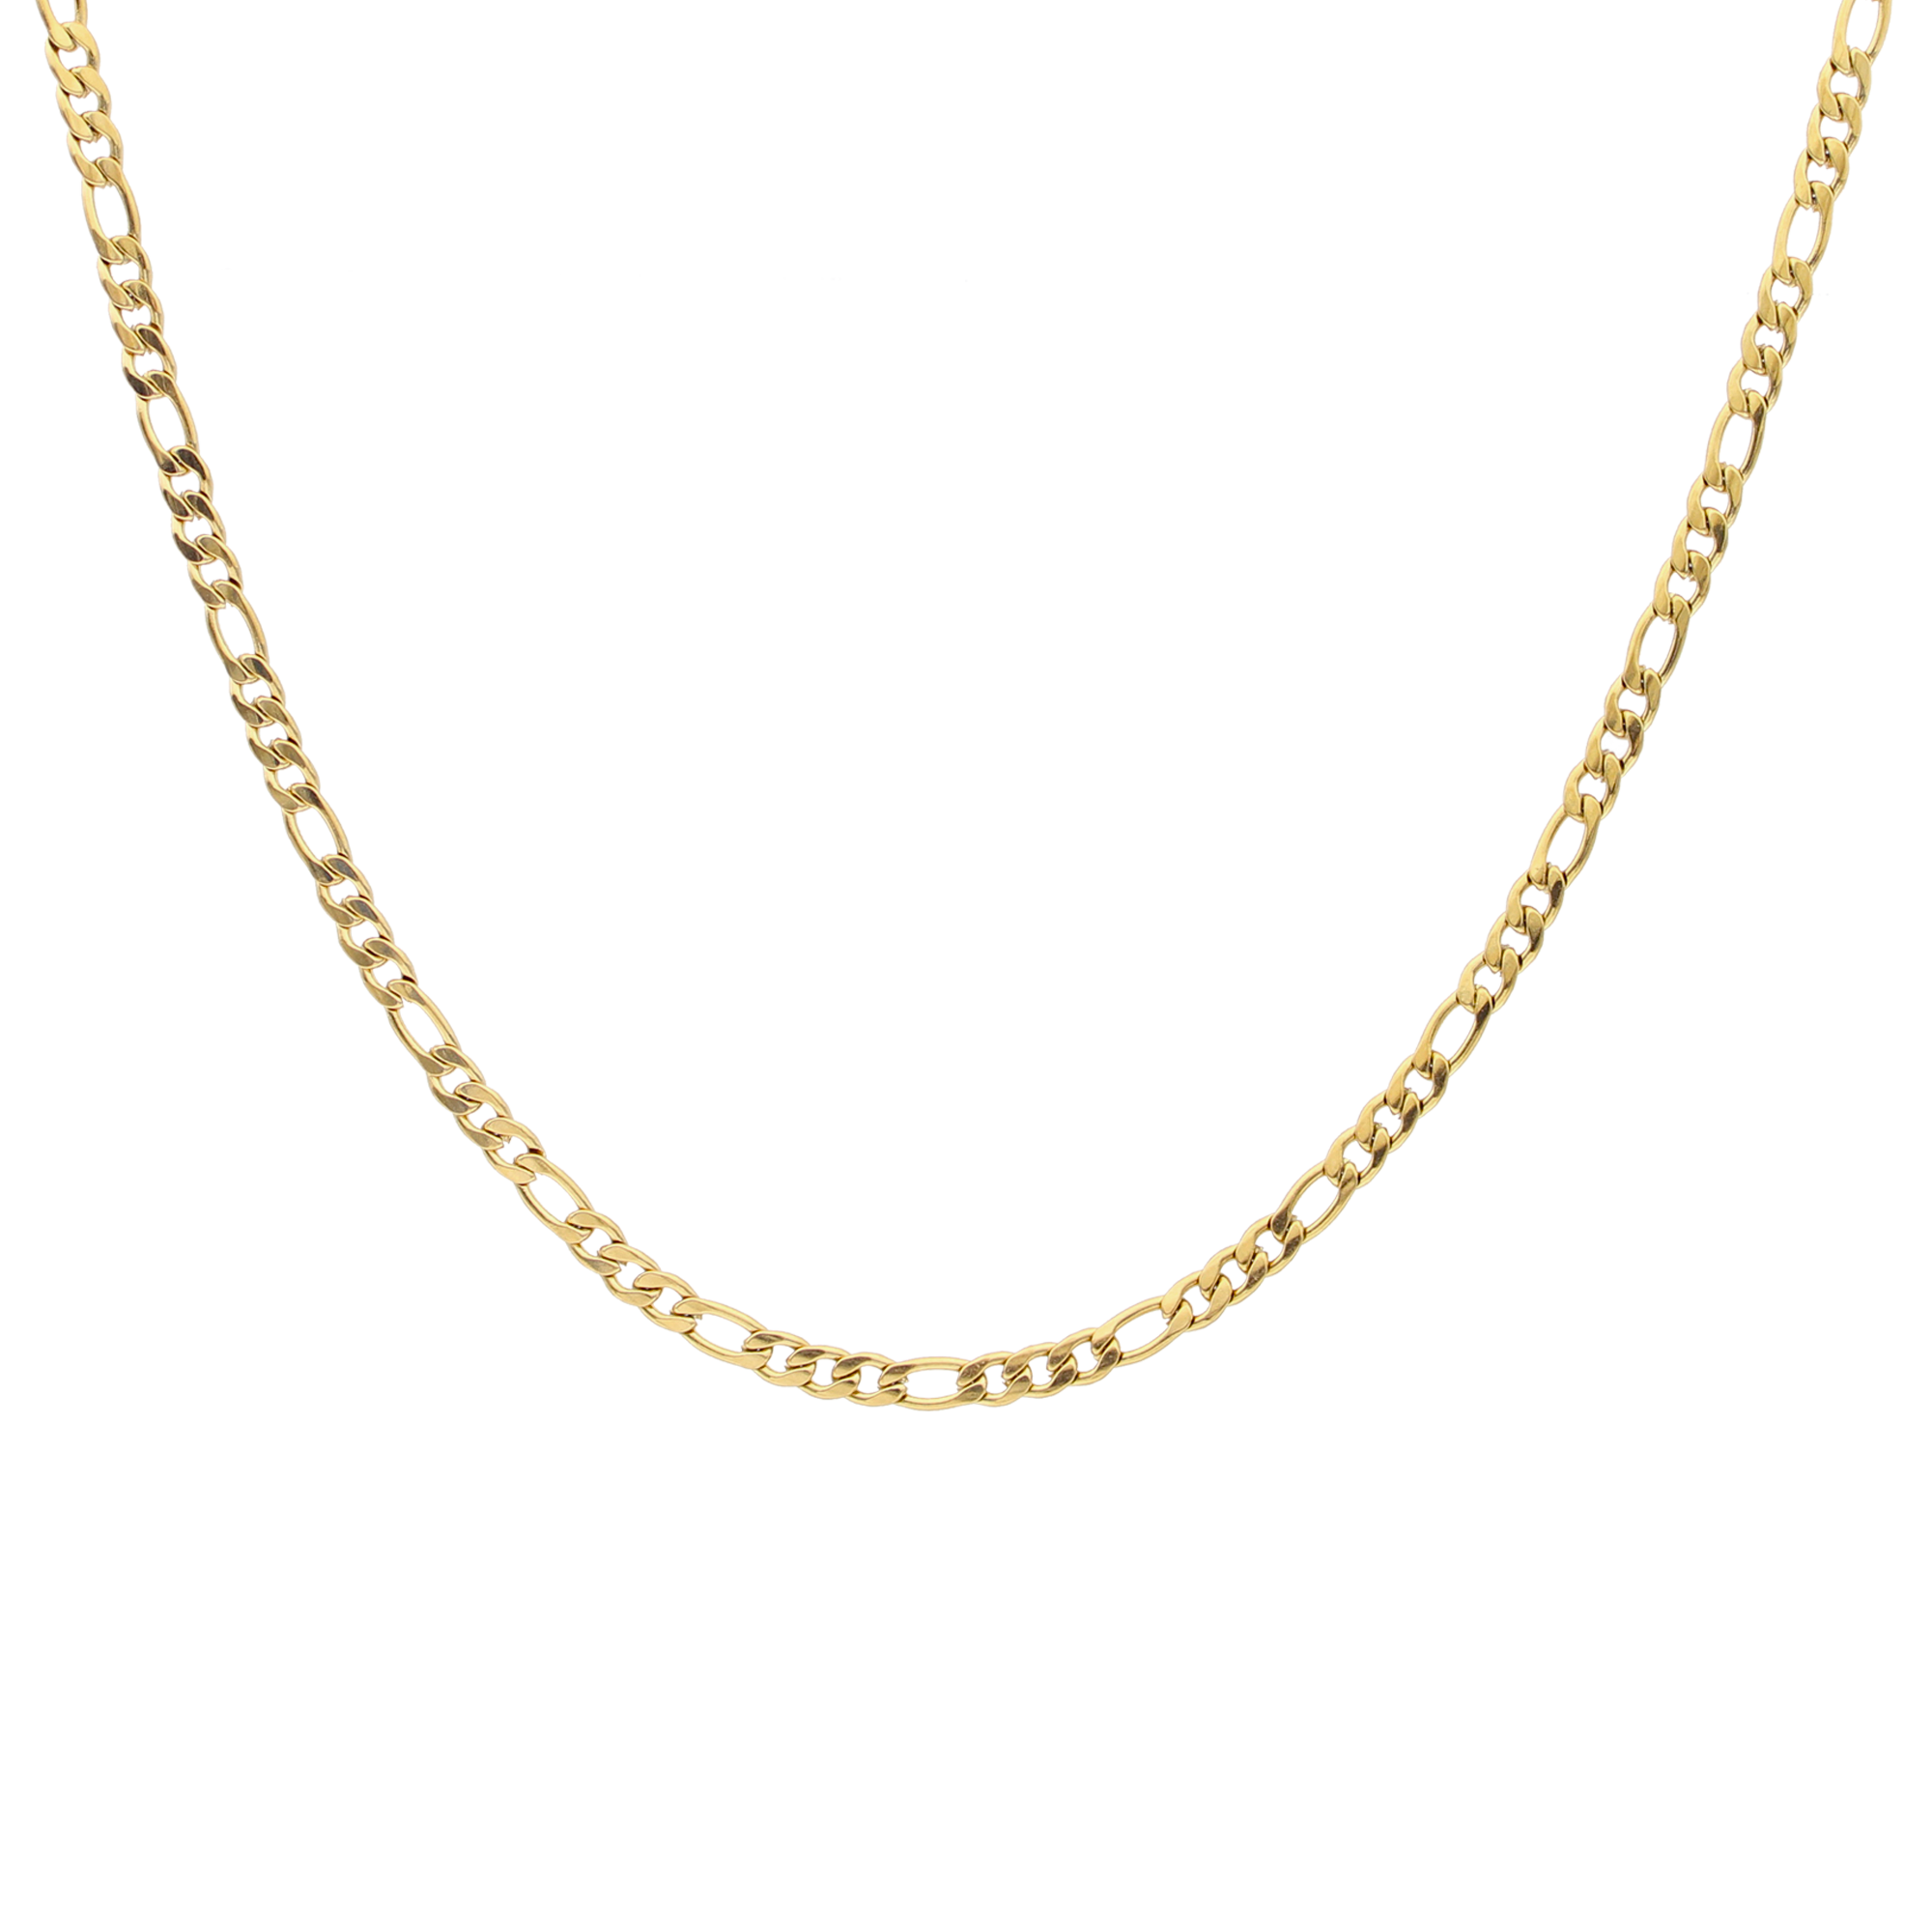 Rhône men's necklace by Five Jwlry, crafted from a 4mm figaro chain in gold-colored, water-resistant 316L stainless steel. Available in sizes 45cm, 55cm, and 65cm. Hypoallergenic with a 2-year warranty.